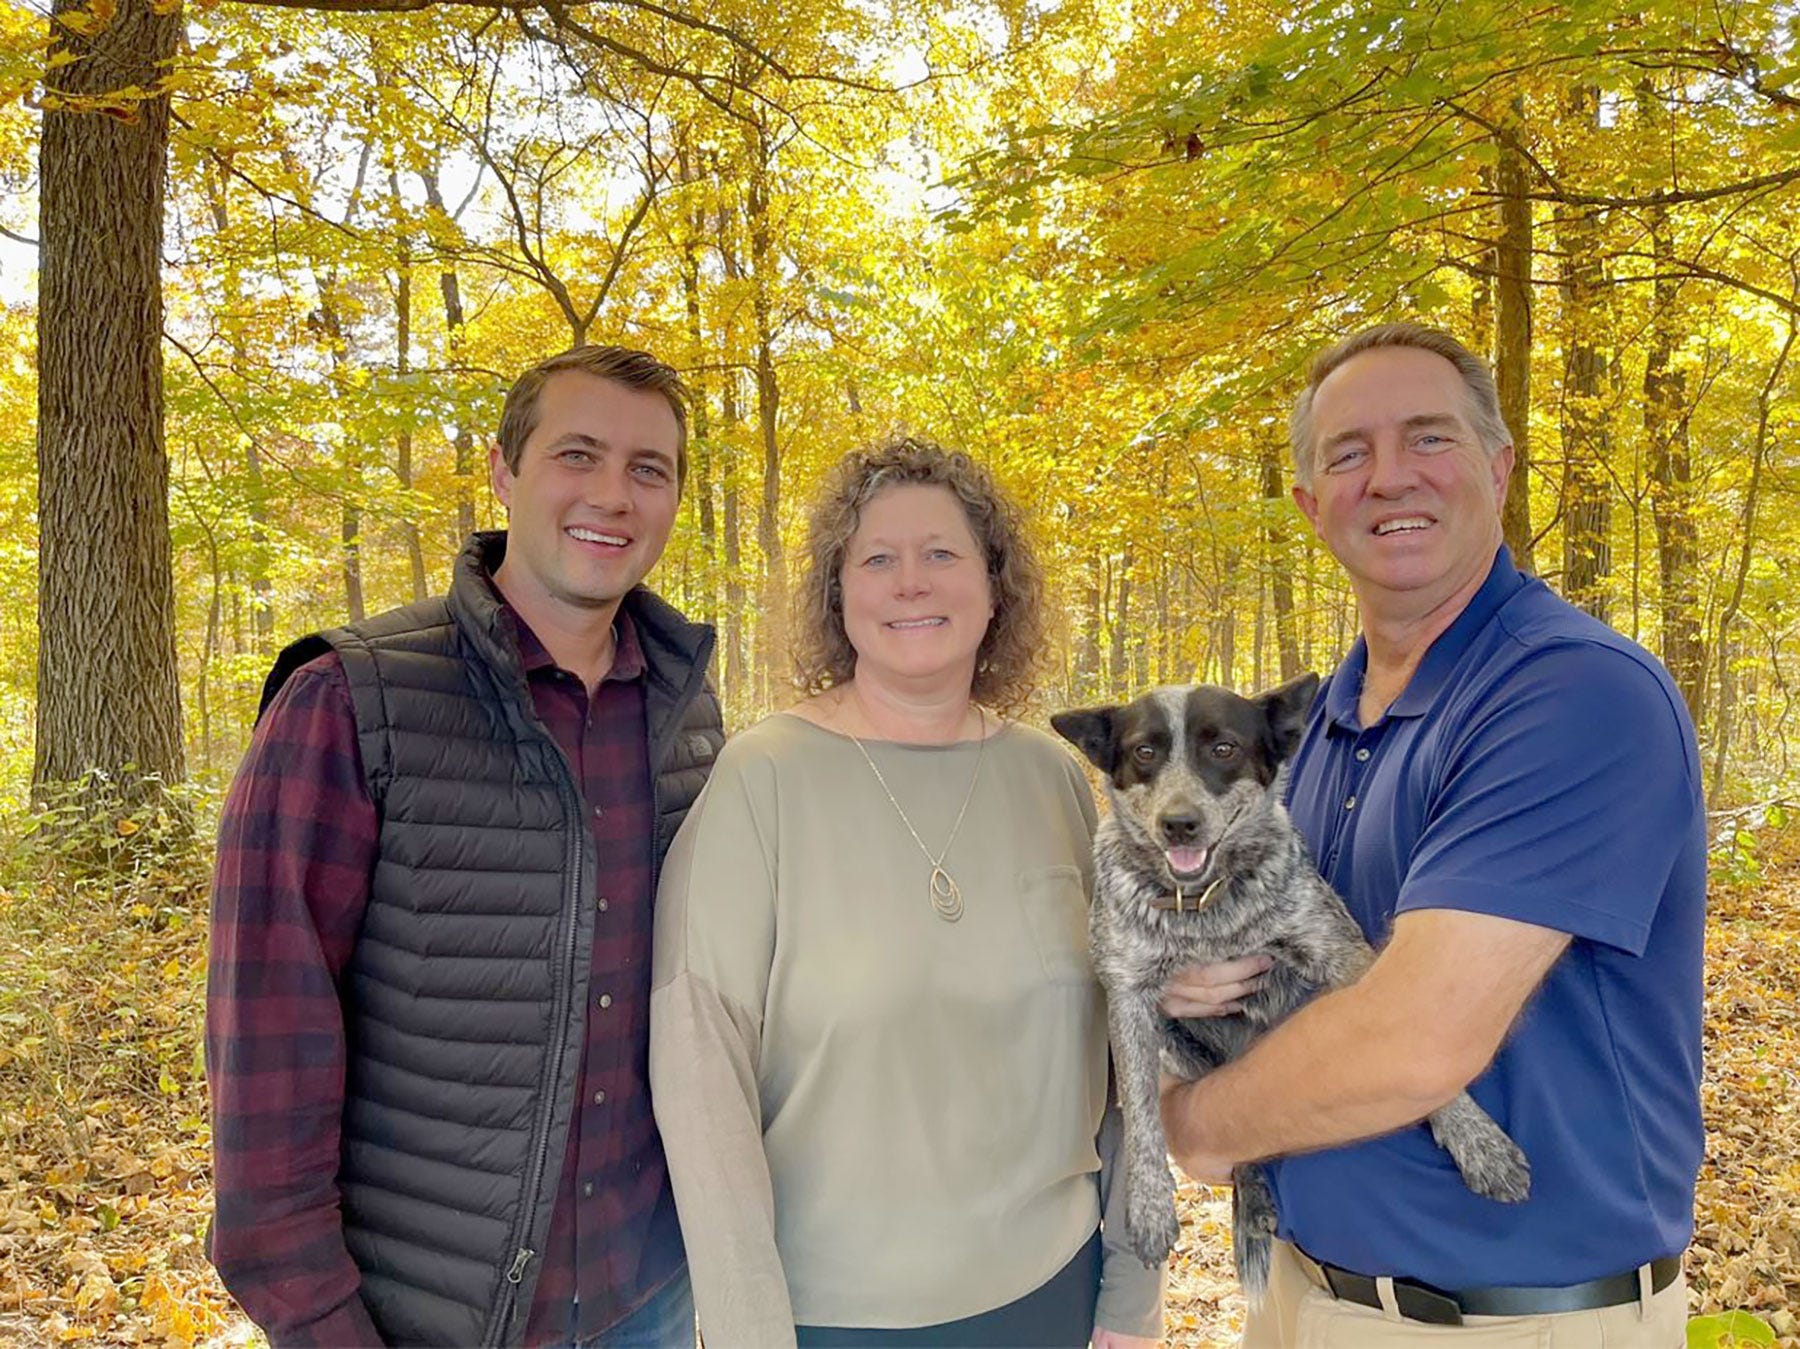 Picture from left: Joe, Diana, the family dog and Dave Fischer standing in a woods in the fall